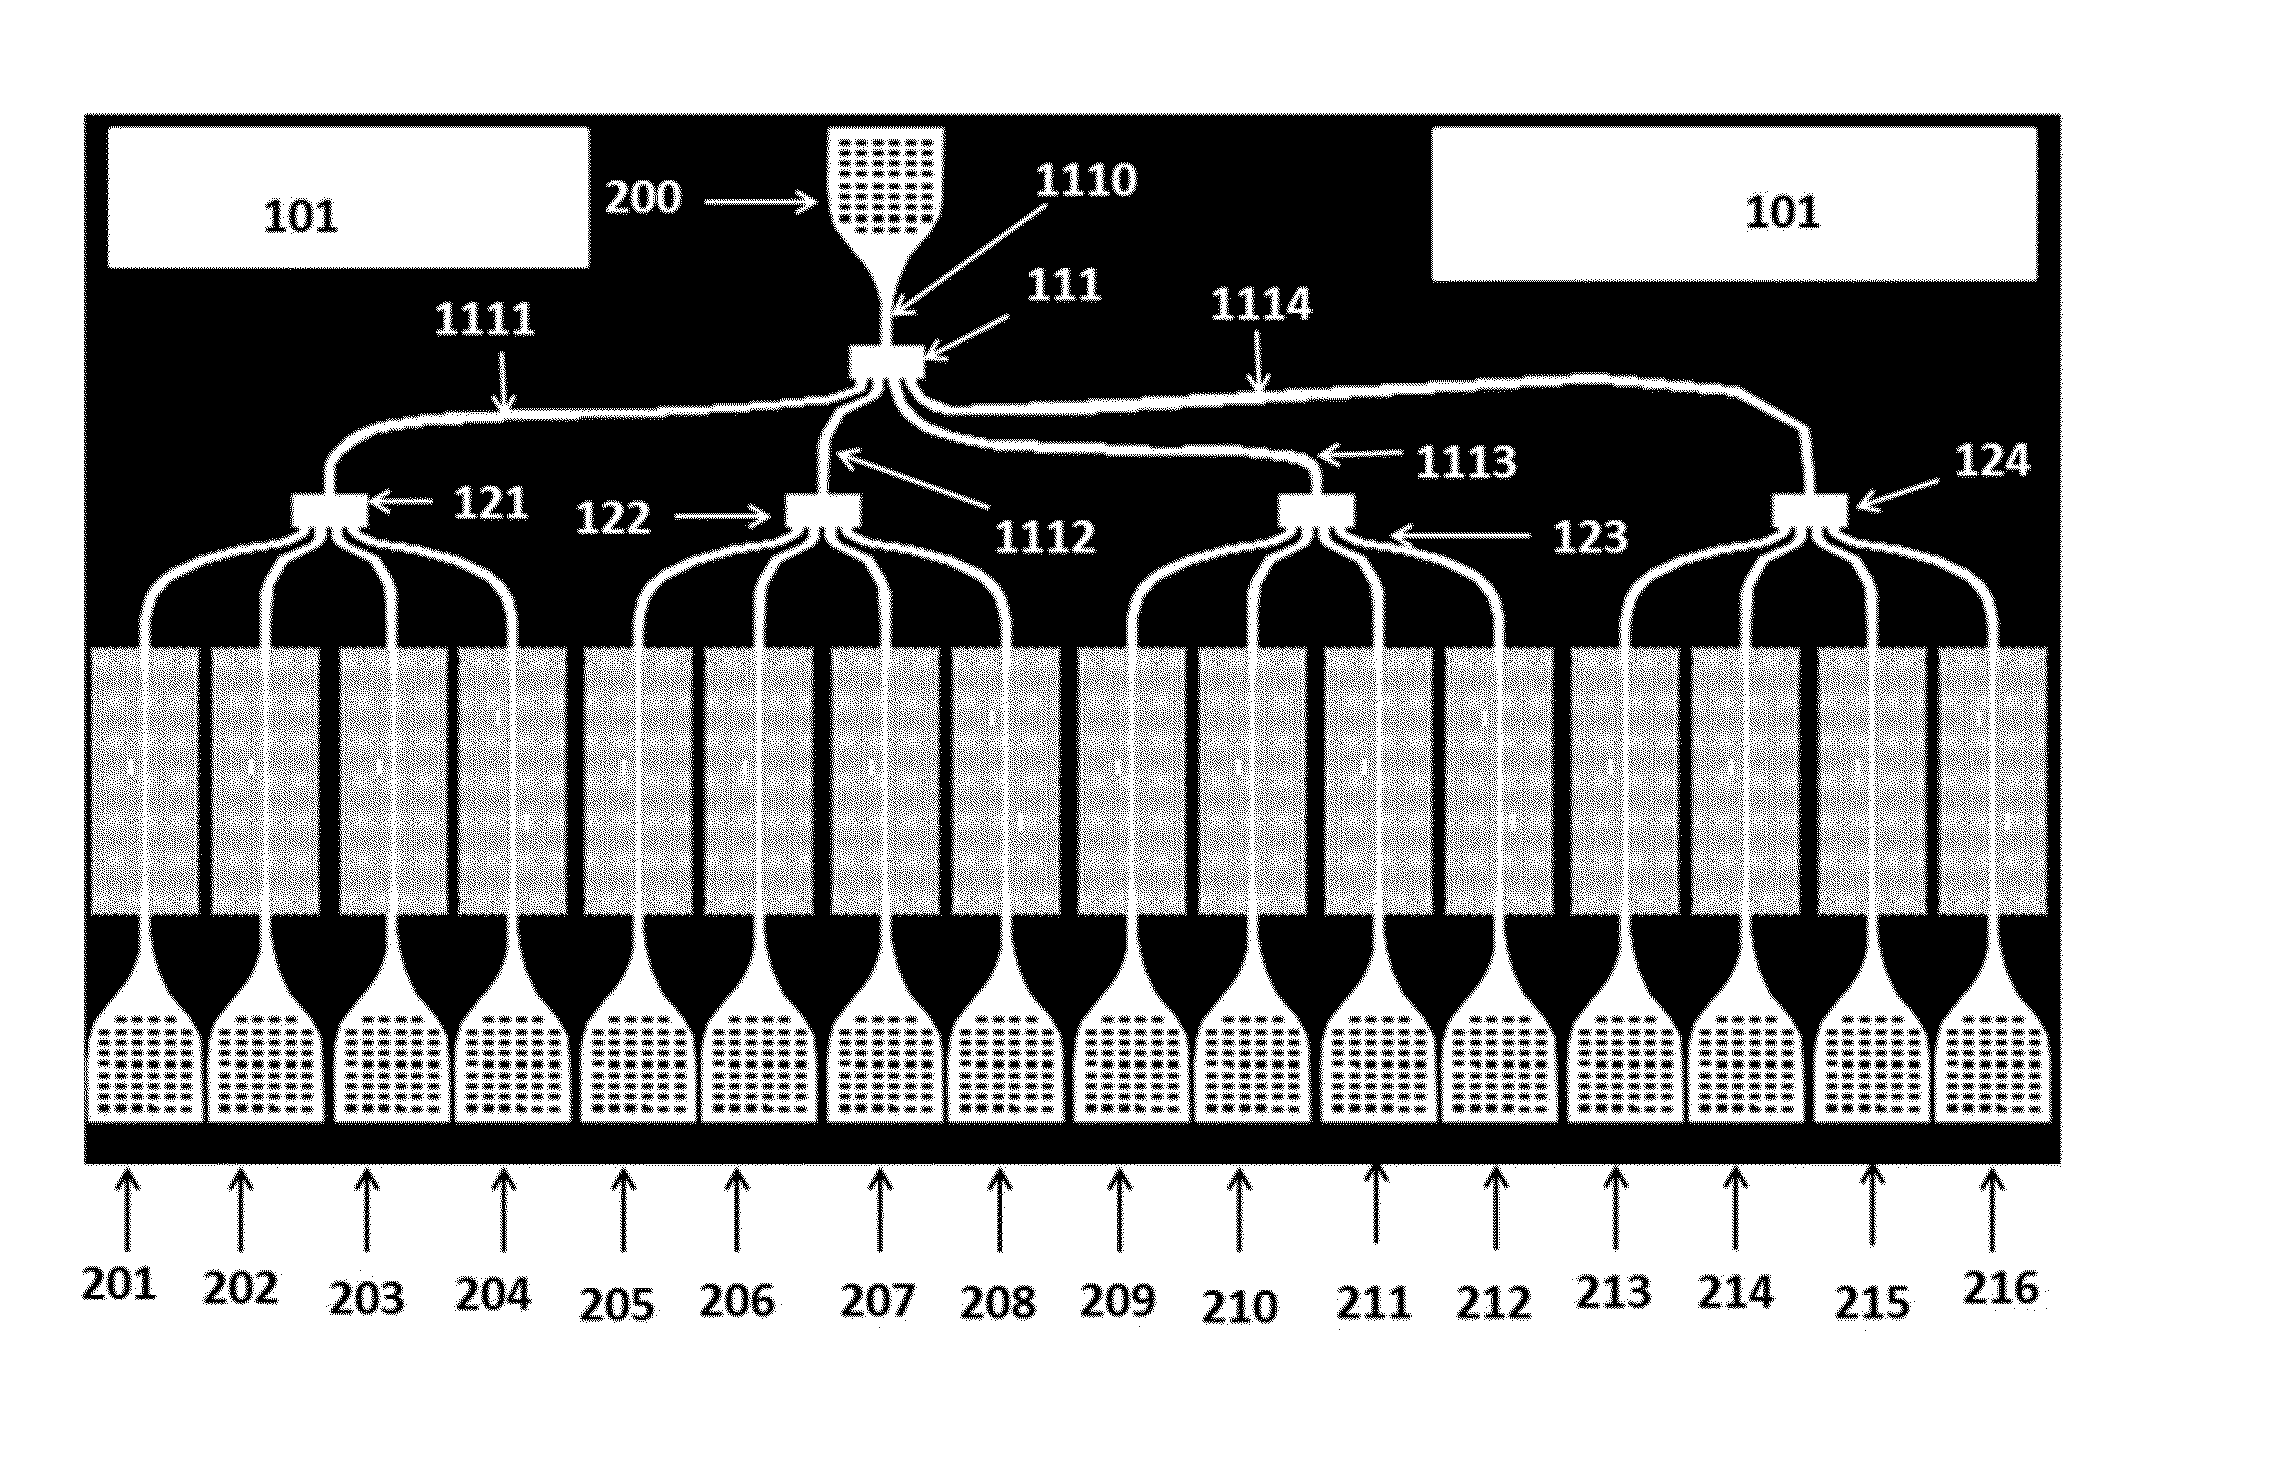 Packaged chip for multiplexing photonic crystal waveguide and photonic crystal slot waveguide devices for chip-integrated label-free detection and absorption spectroscopy with high throughput, sensitivity, and specificity